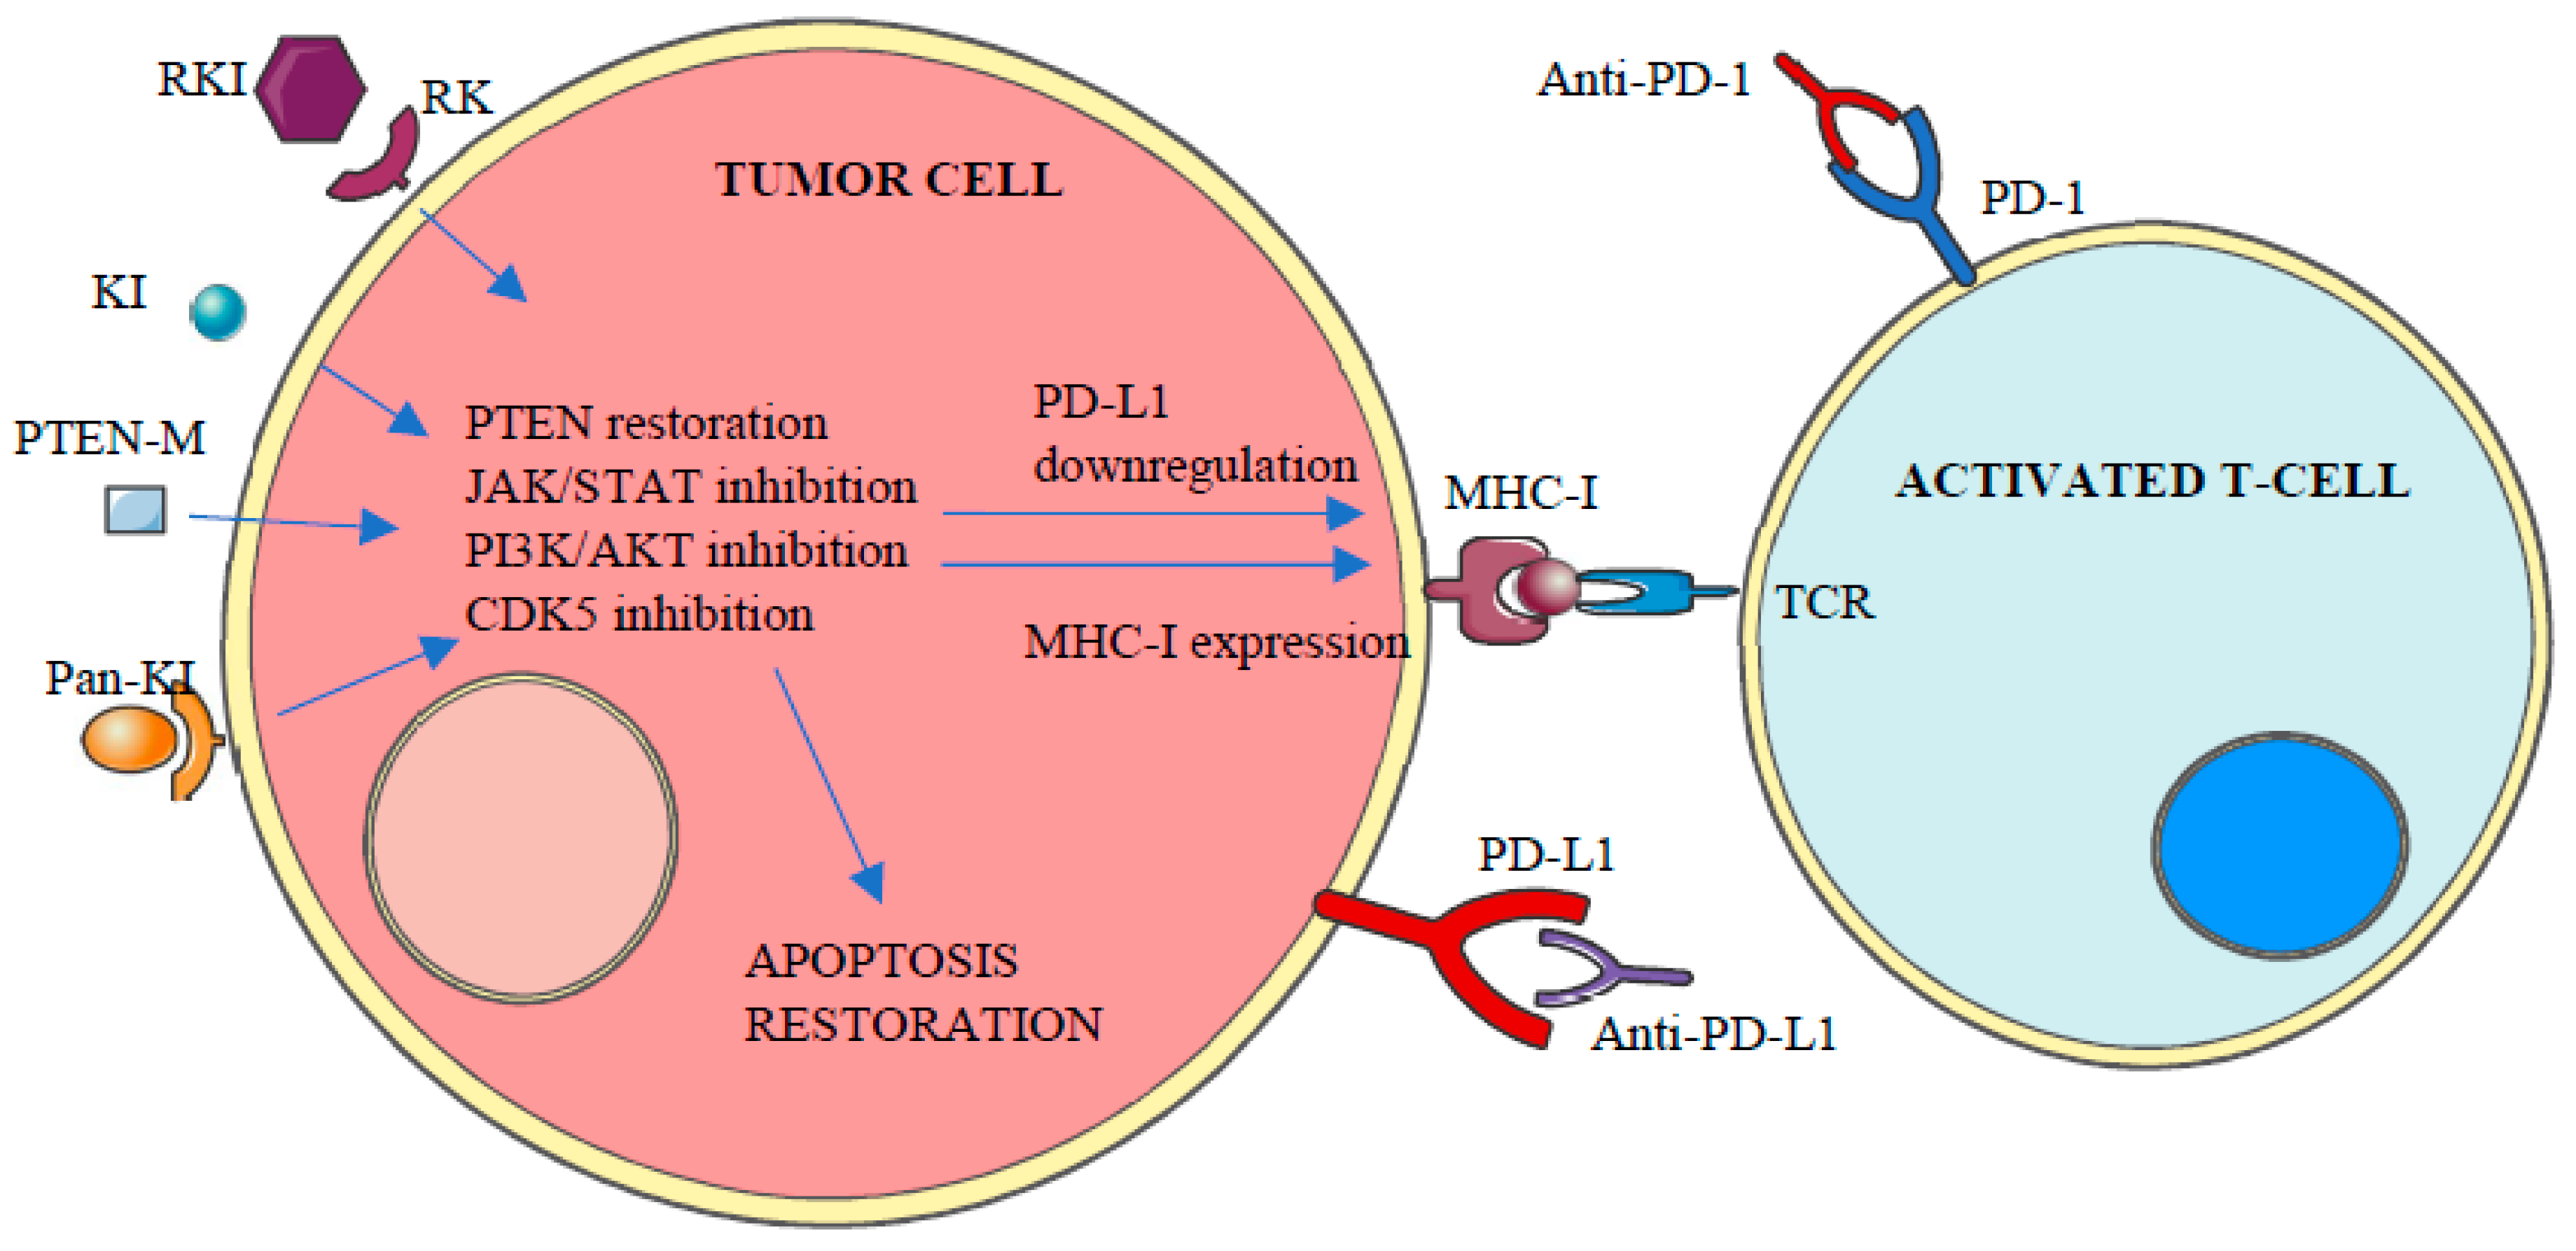 Targeting Protein Kinases to Enhance the Response to anti-PD-1/PD-L1 Immunotherapy